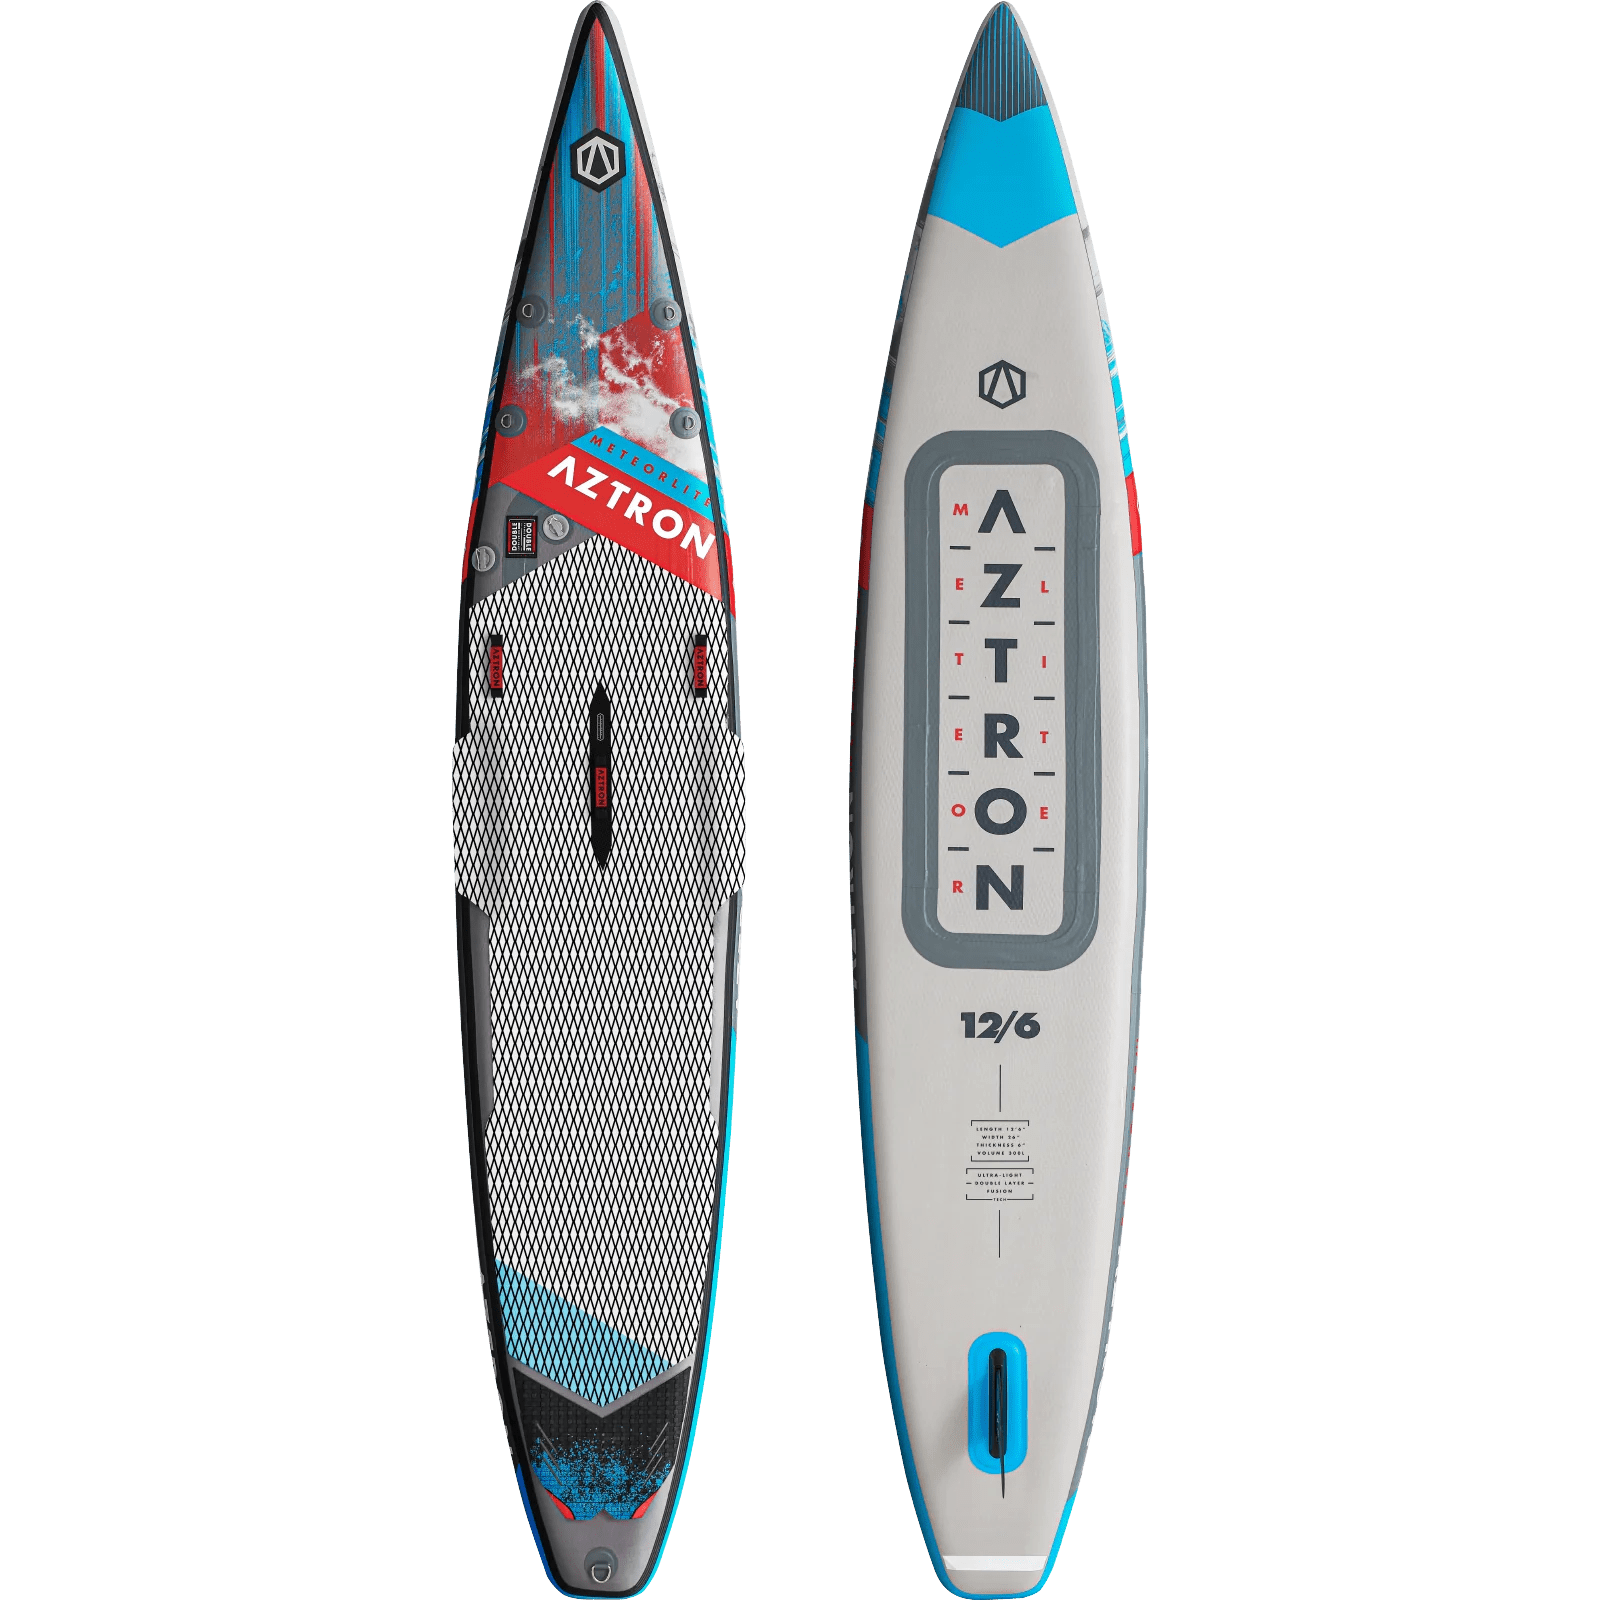 Aztron Meteorlite Race Pro 12'6" - Worthing Watersports - SUP Inflatables - Aztron